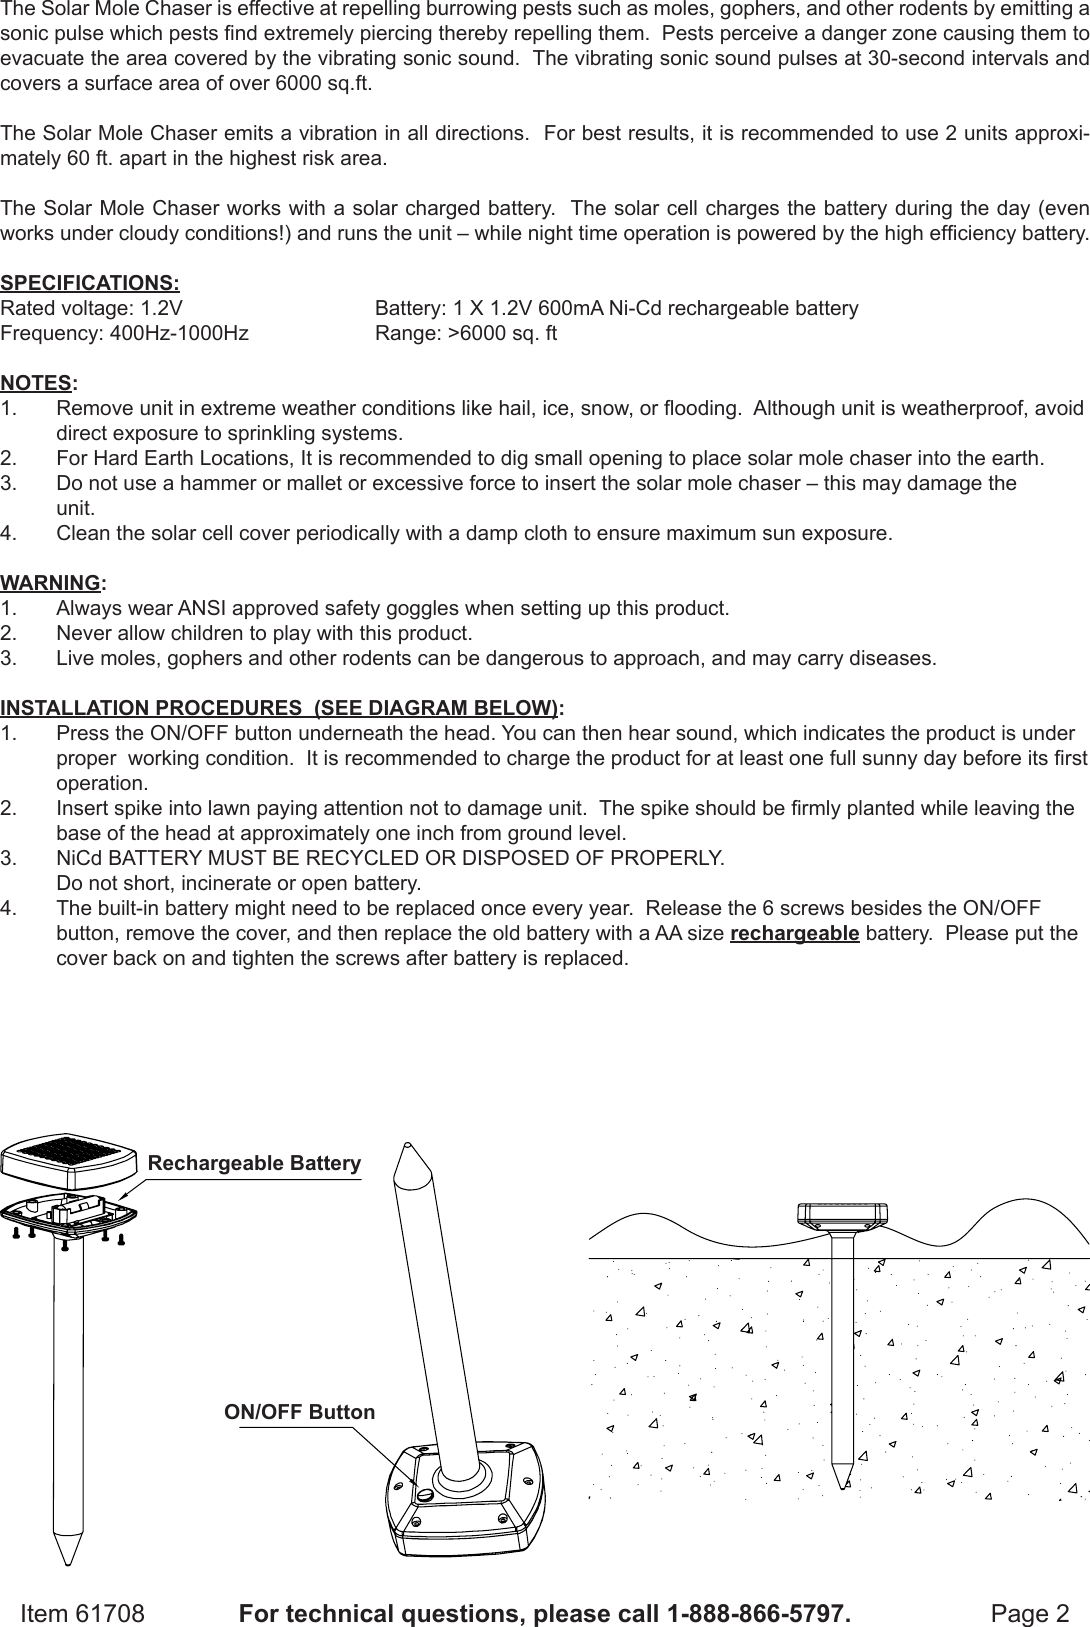 Page 2 of 2 - Manual For The 61708 Solar Mole Chaser